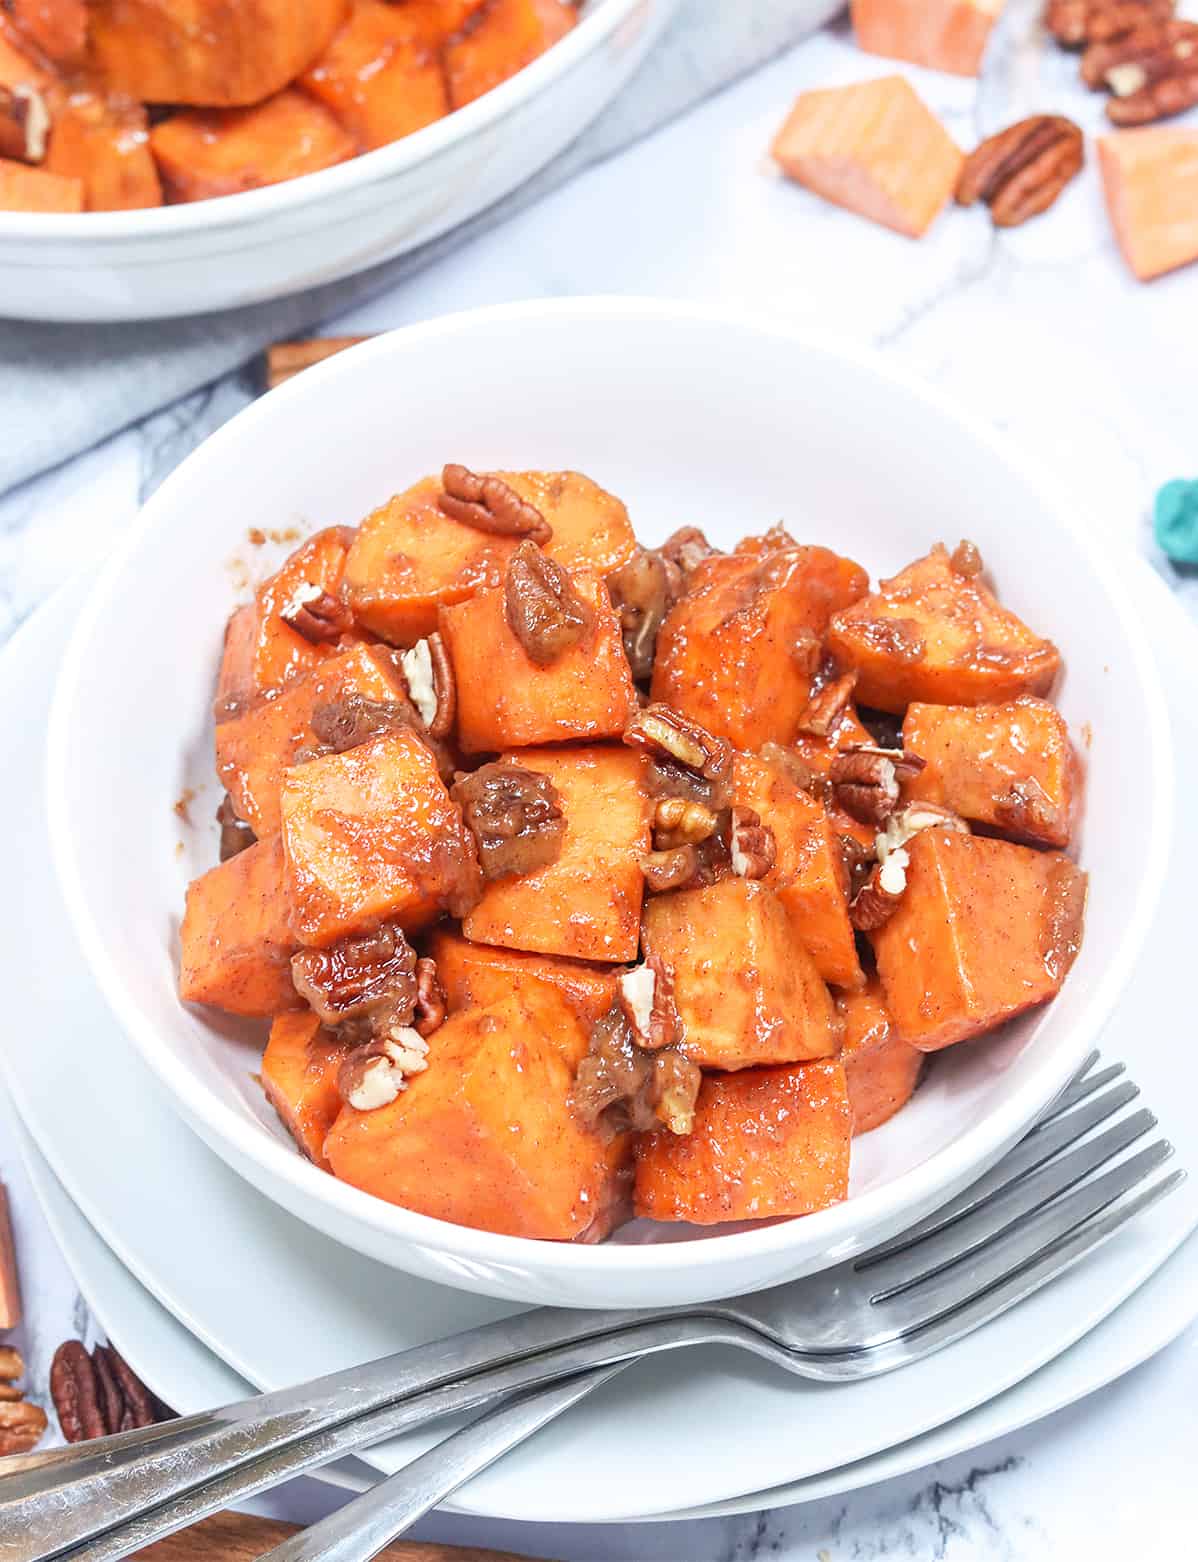 Serving up comforting yam casserole in a white bowl